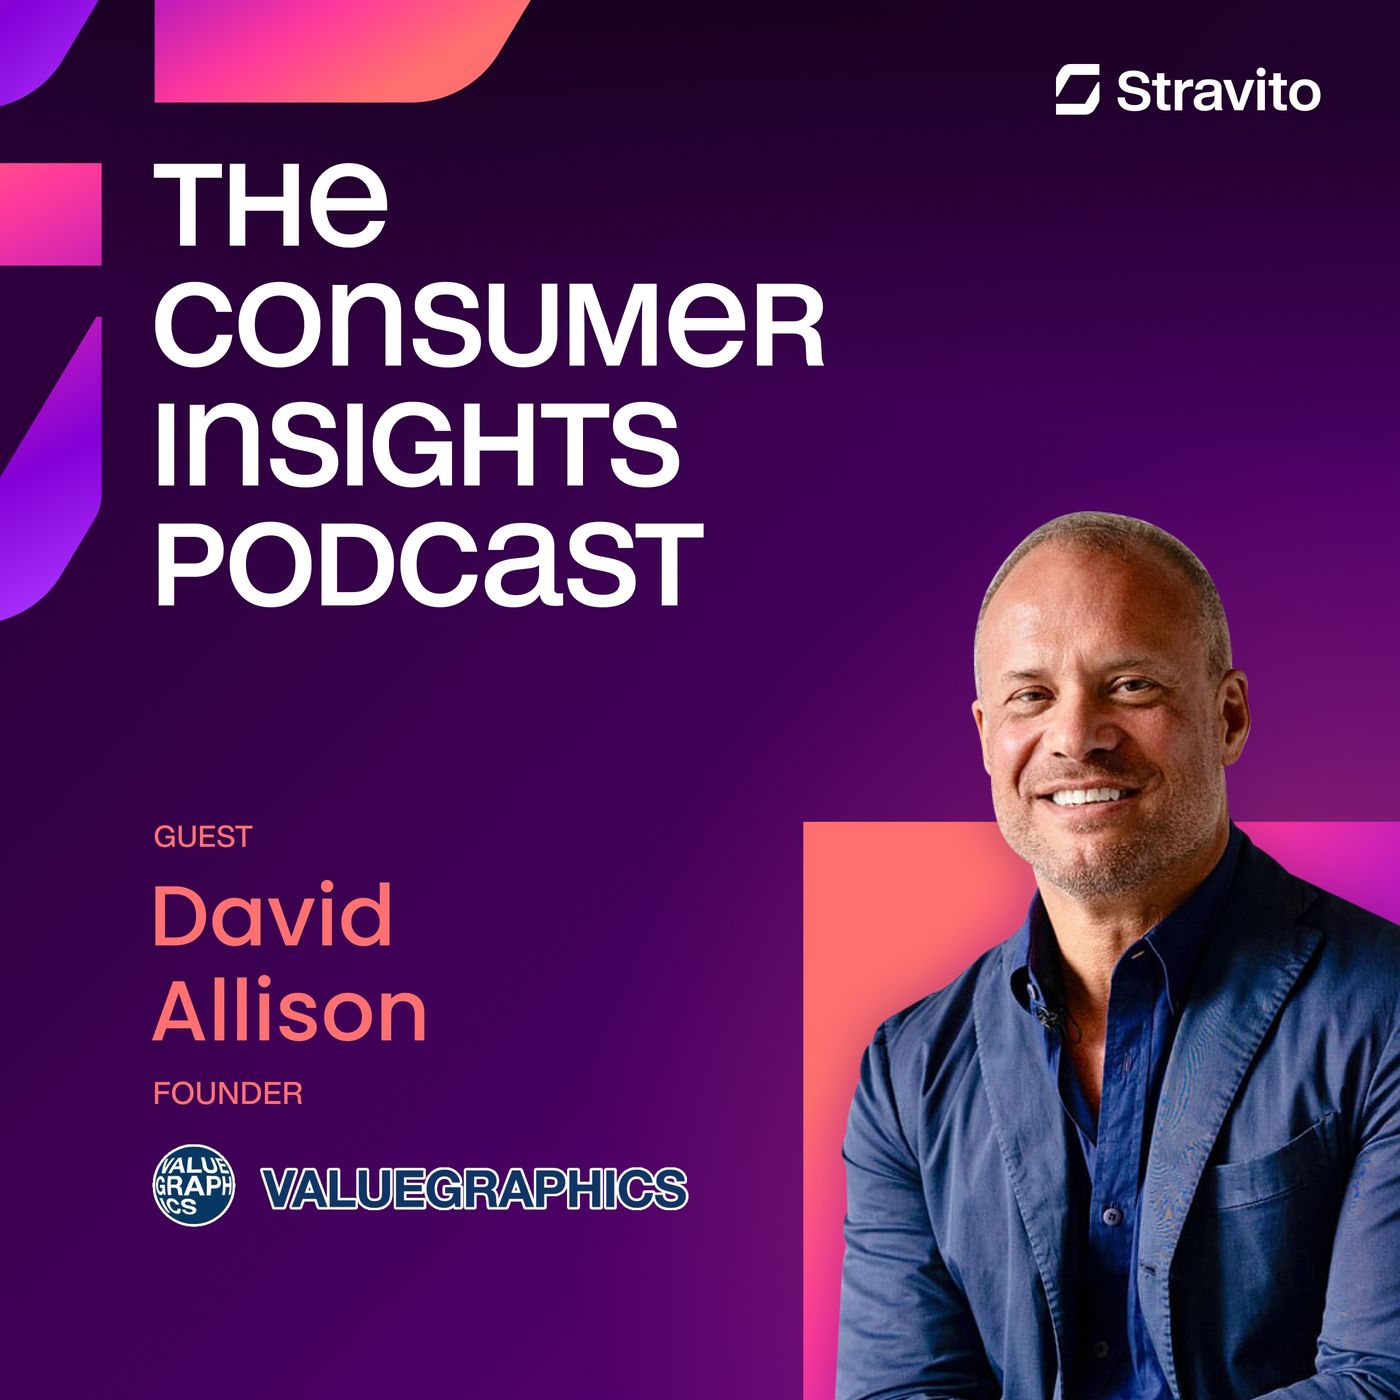 How Uncovering Values Unlocks Insights with David Allison, Founder of Valuegraphics